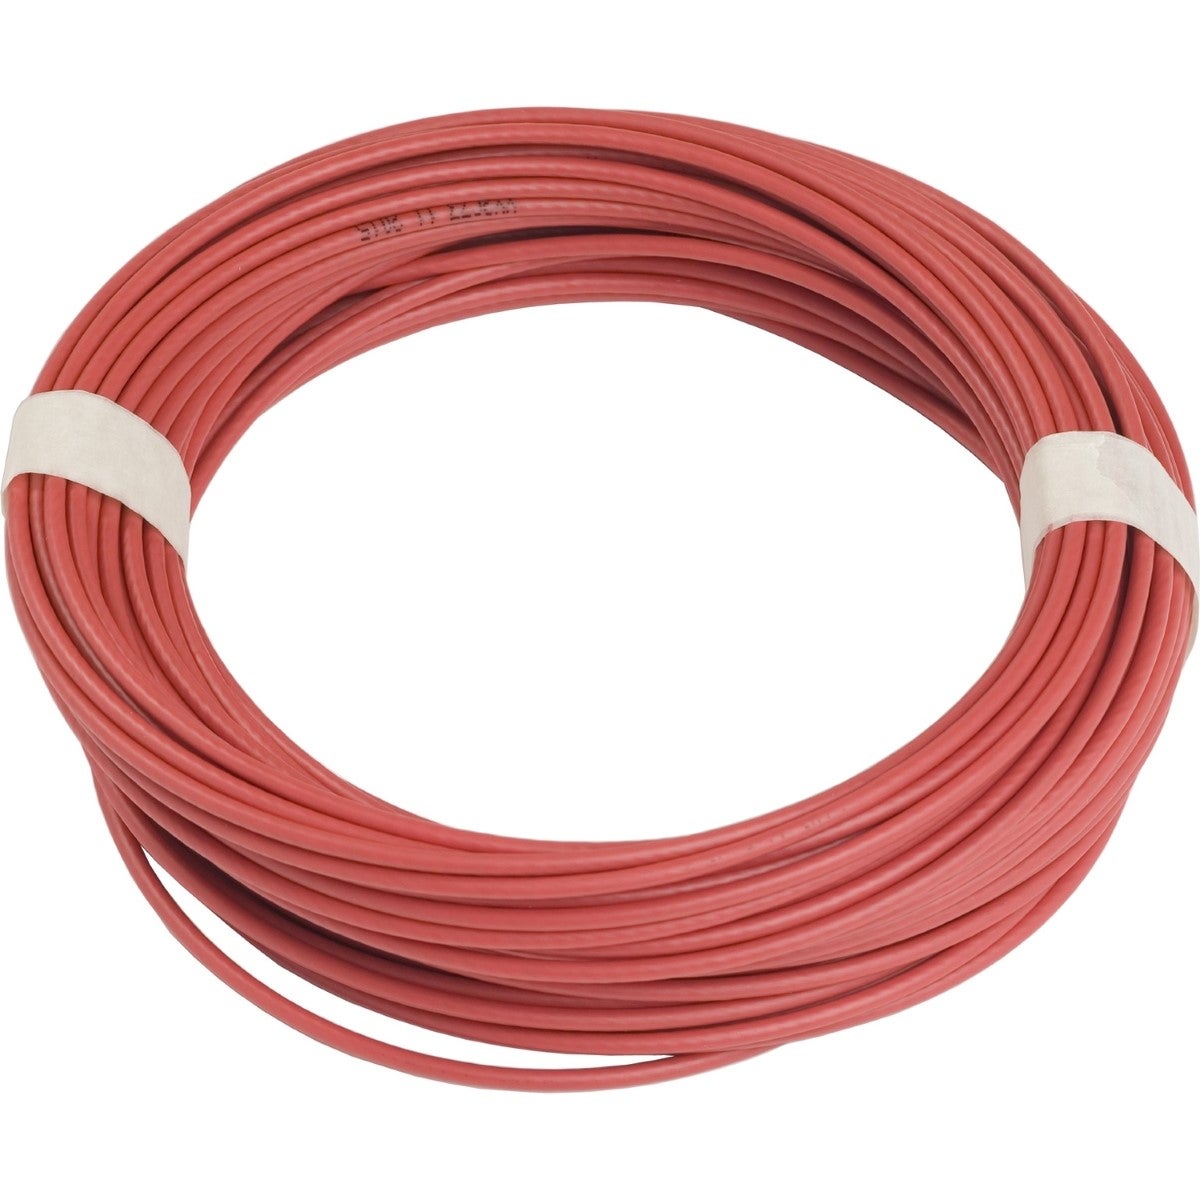 Telemecanique Emergency stop rope pull switches XY2C, red galvanised cable, Ø 3.2 mm, L 25.5 m, for XY2C